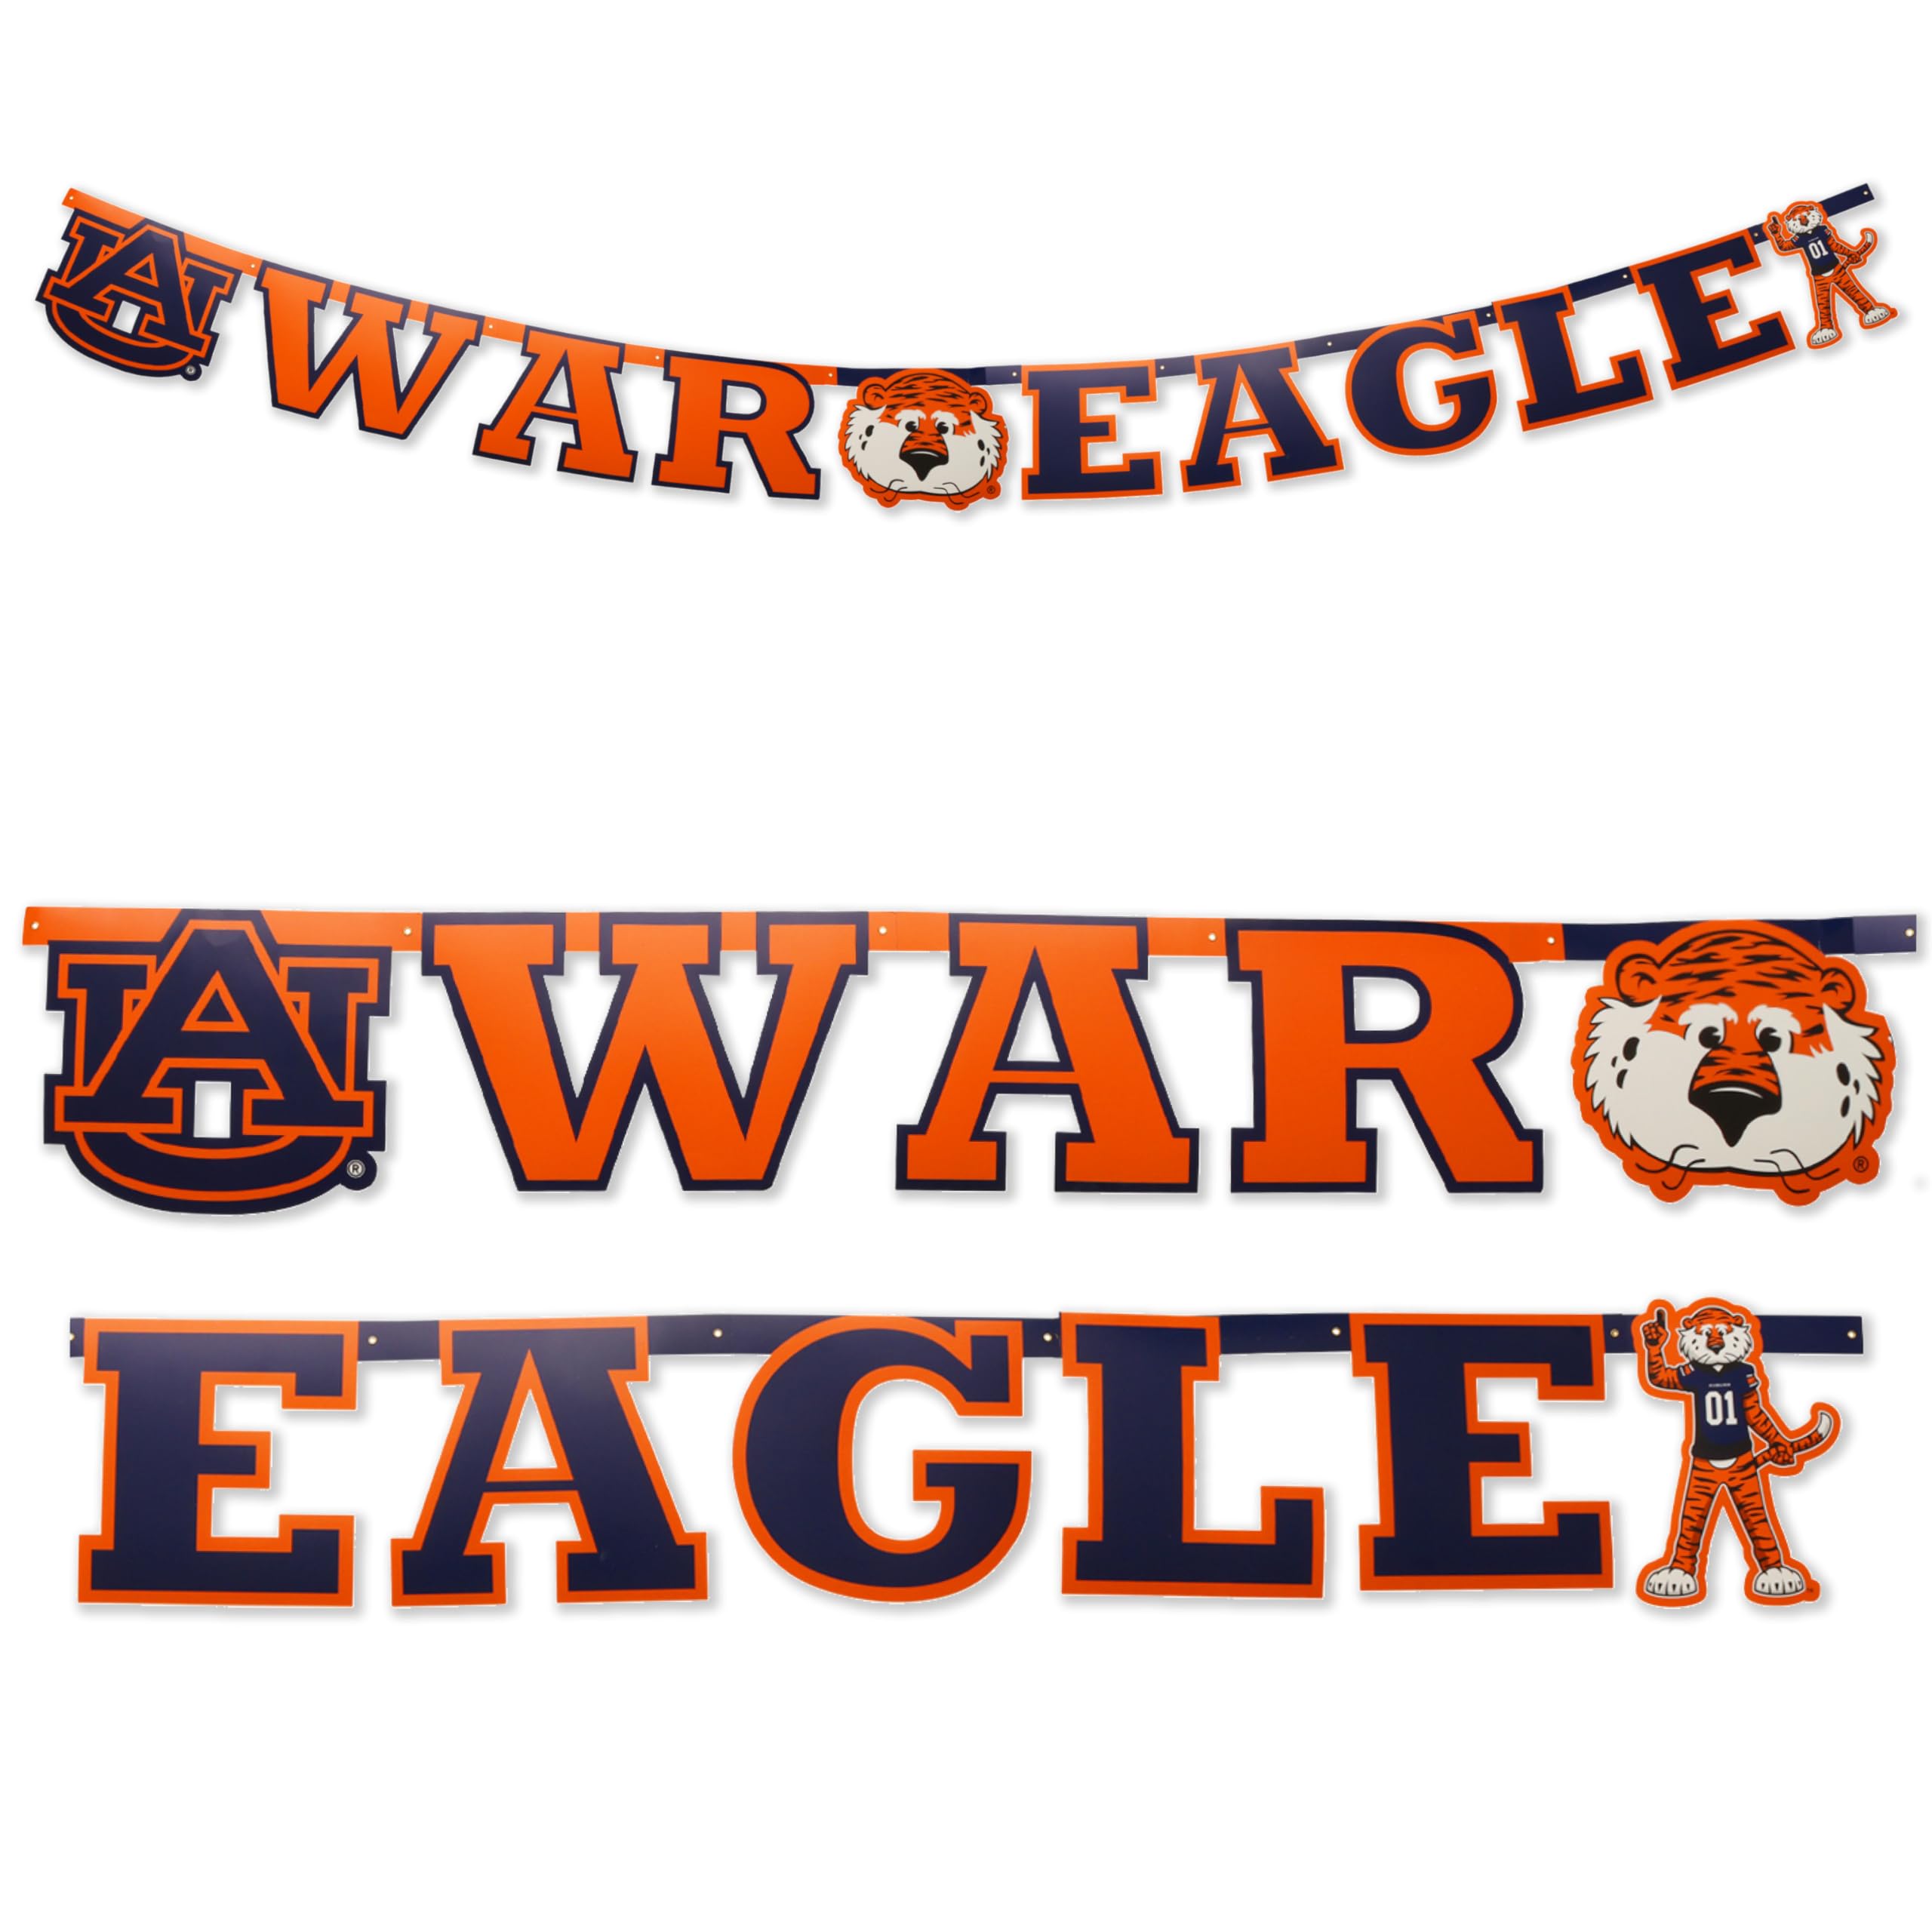 Auburn University War Eagle Banner! 7 ¾ Foot Long Banner. Proudly Displaying the Official Auburn Logo & Aubie! For Tailgates, Graduation, Birthdays, Football Parties, Dorm or Home Decor! by Havercamp